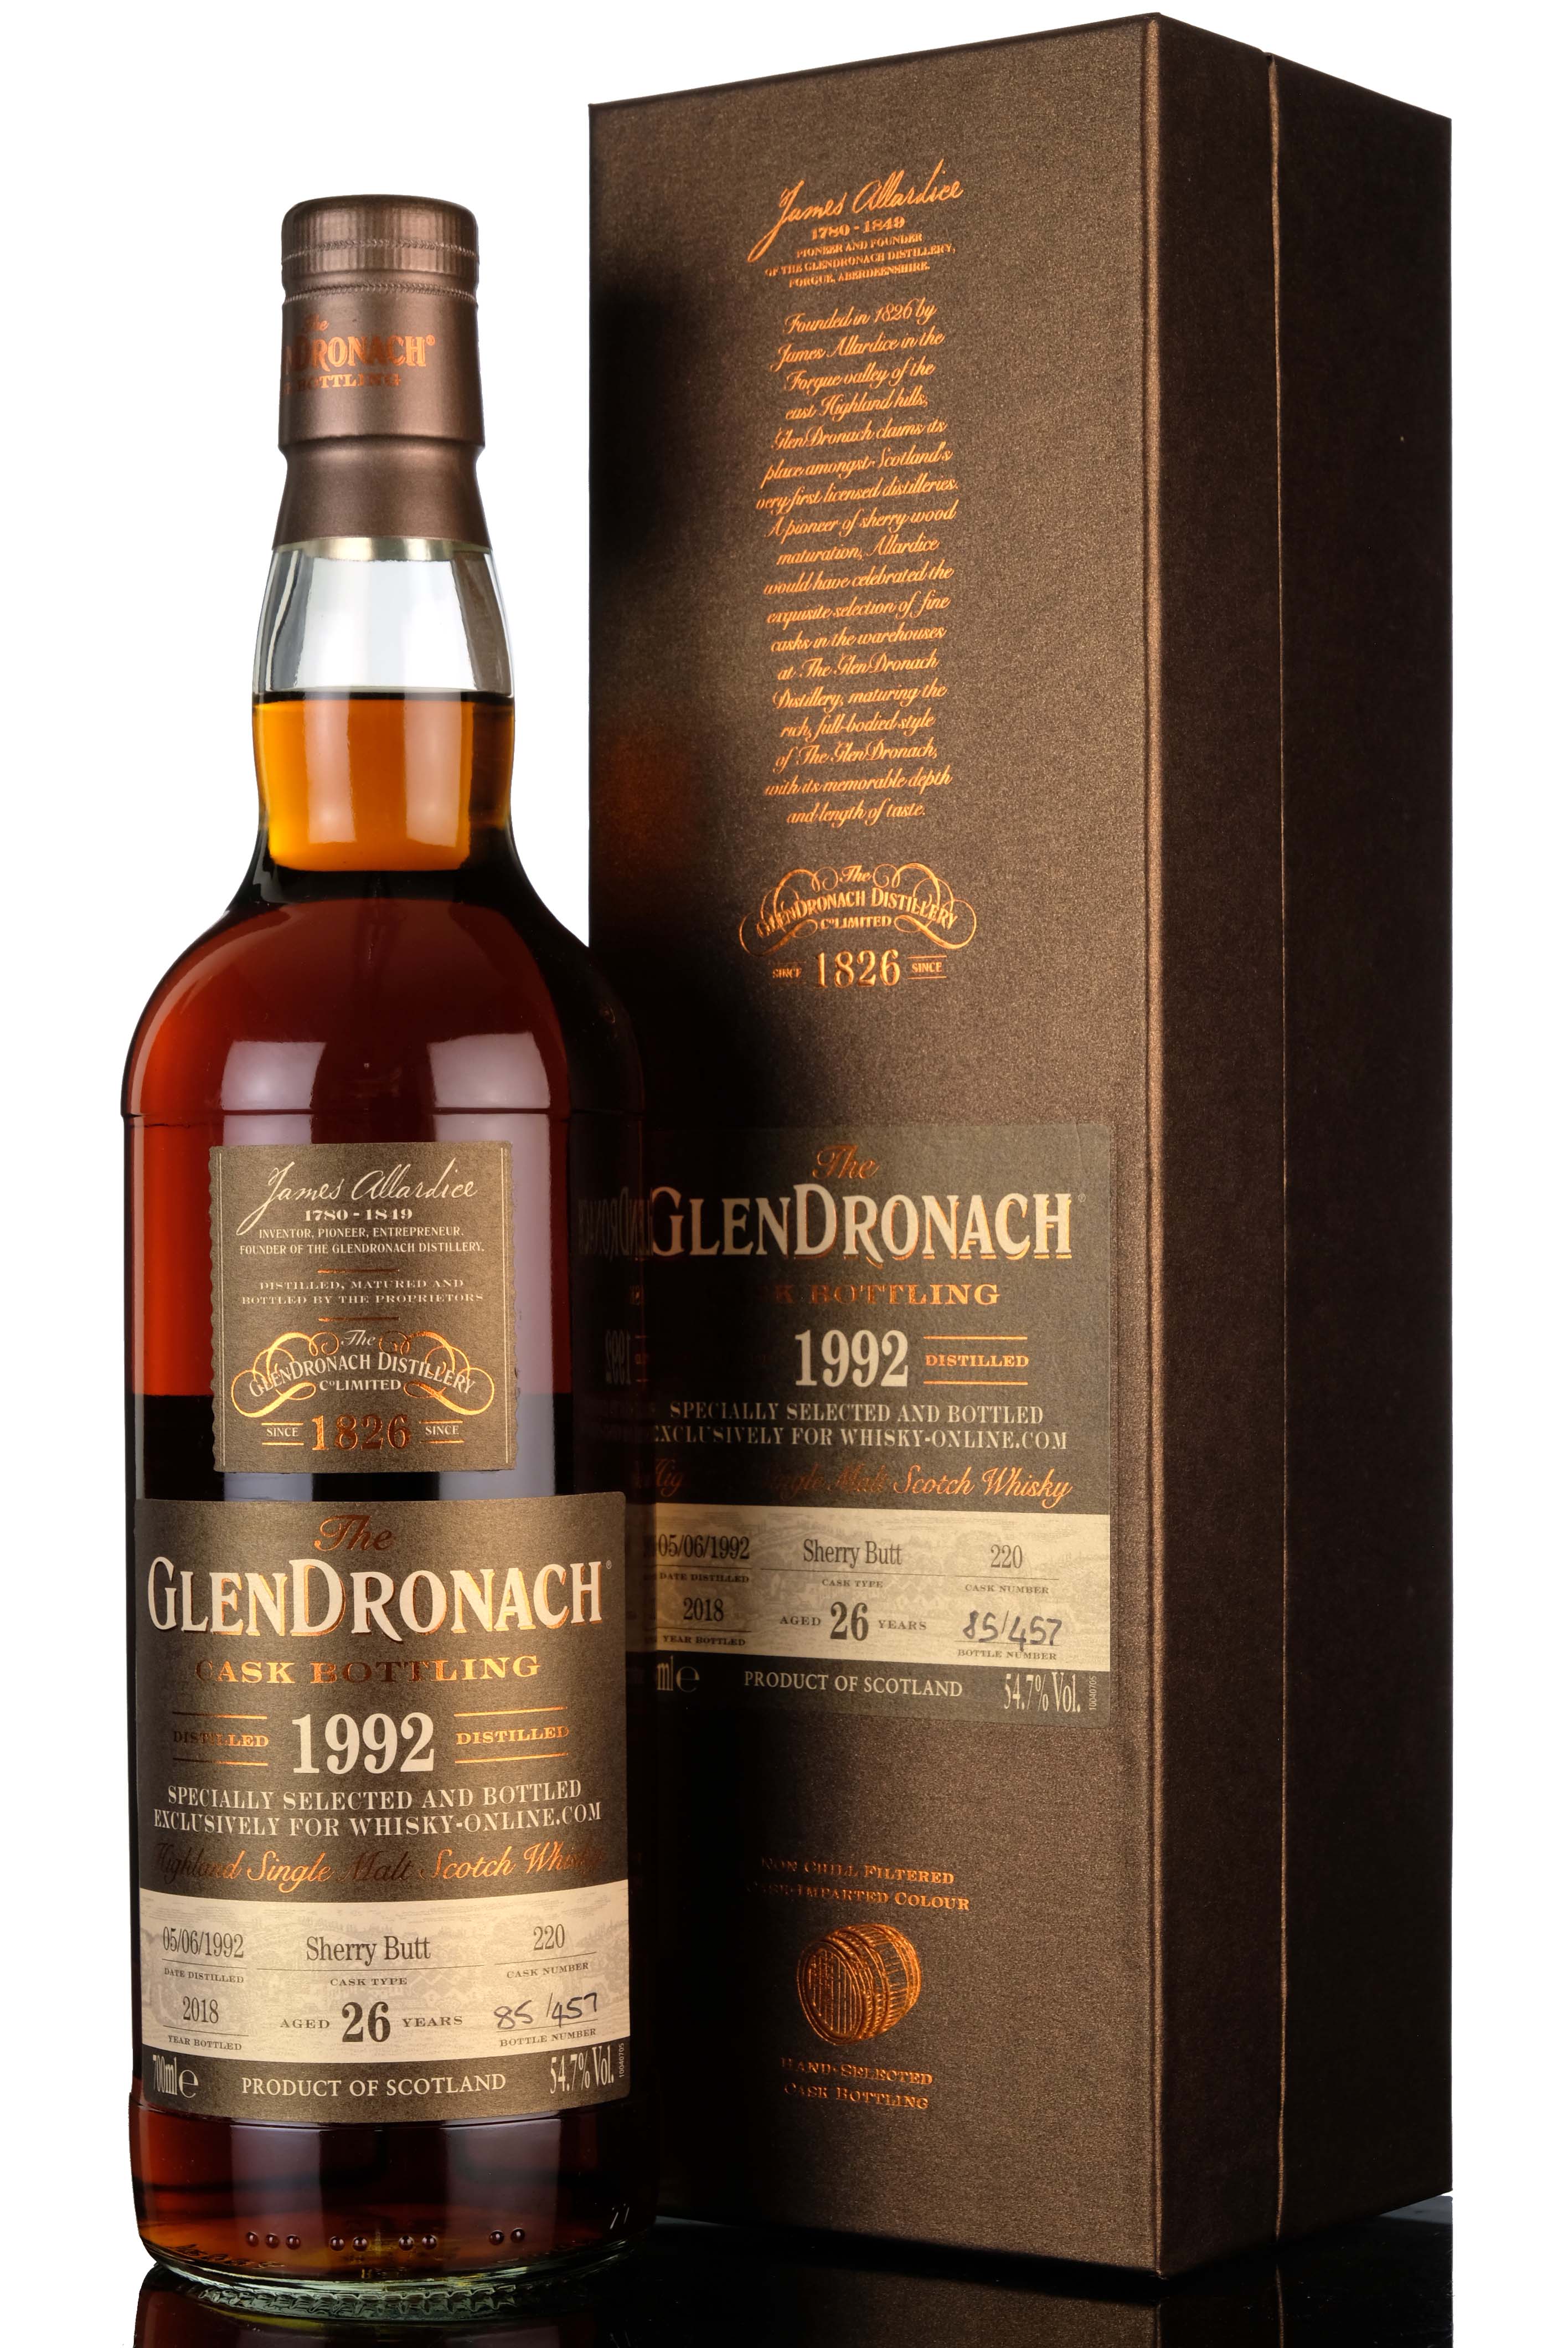 Glendronach 1992-2018 - 26 Year Old - Single Cask 220 - Whisky-Online Exclusive